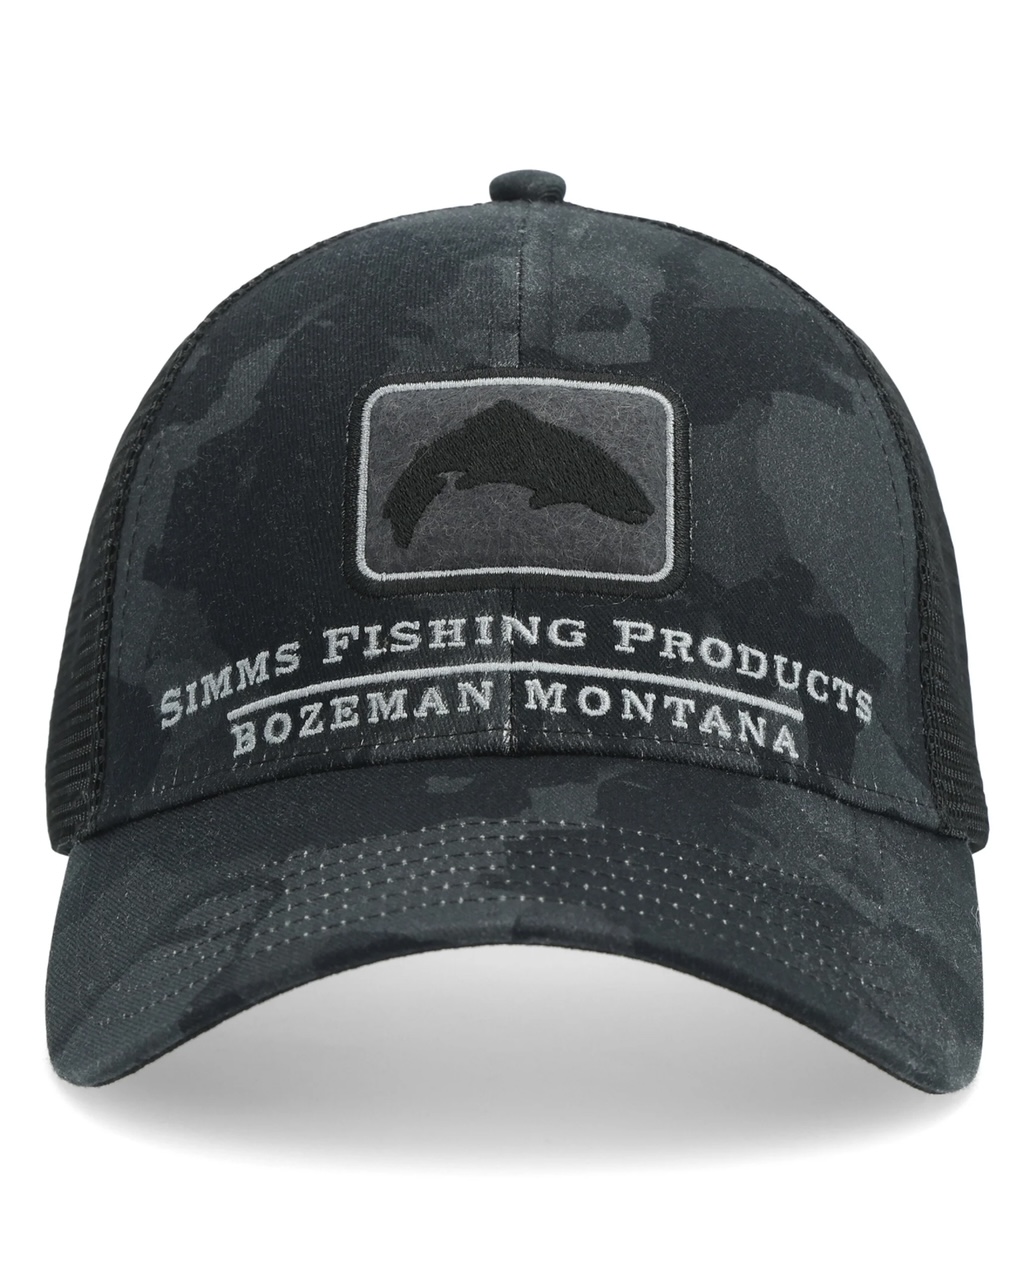 Simms Fishing Trout Icon Trucker Hat